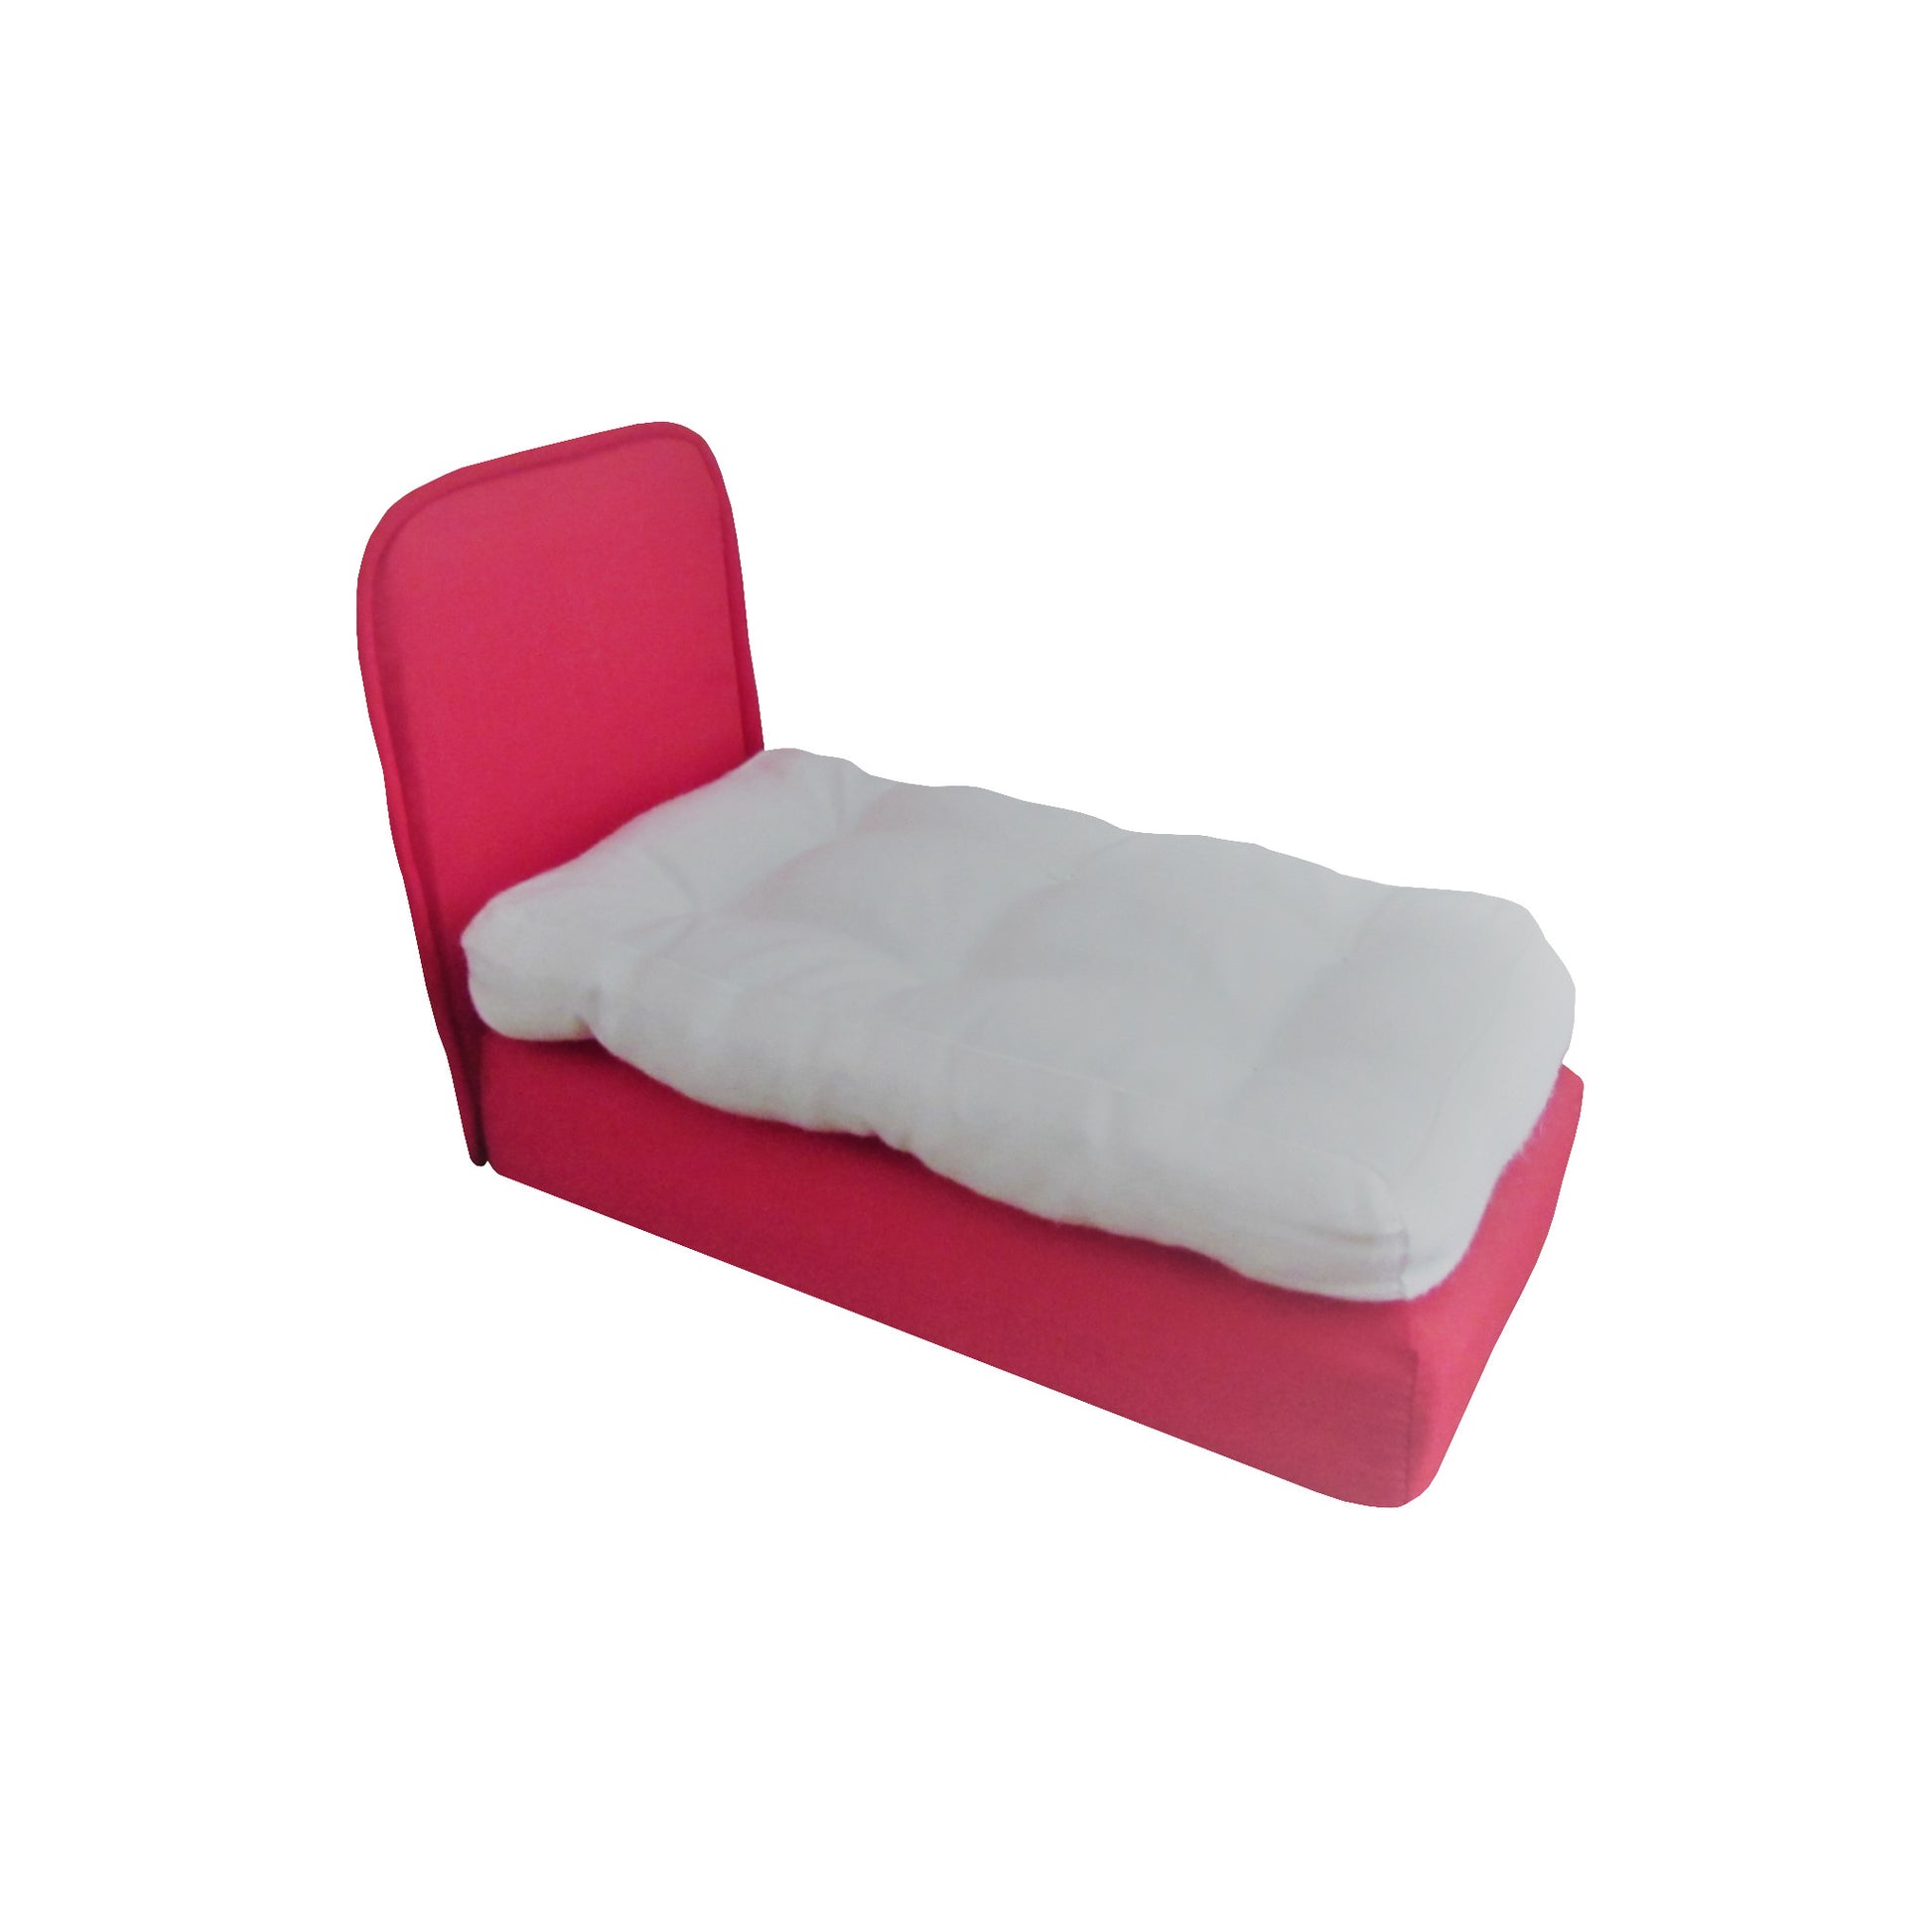 Upholstered Red Doll Bed for 6.5-inch dolls